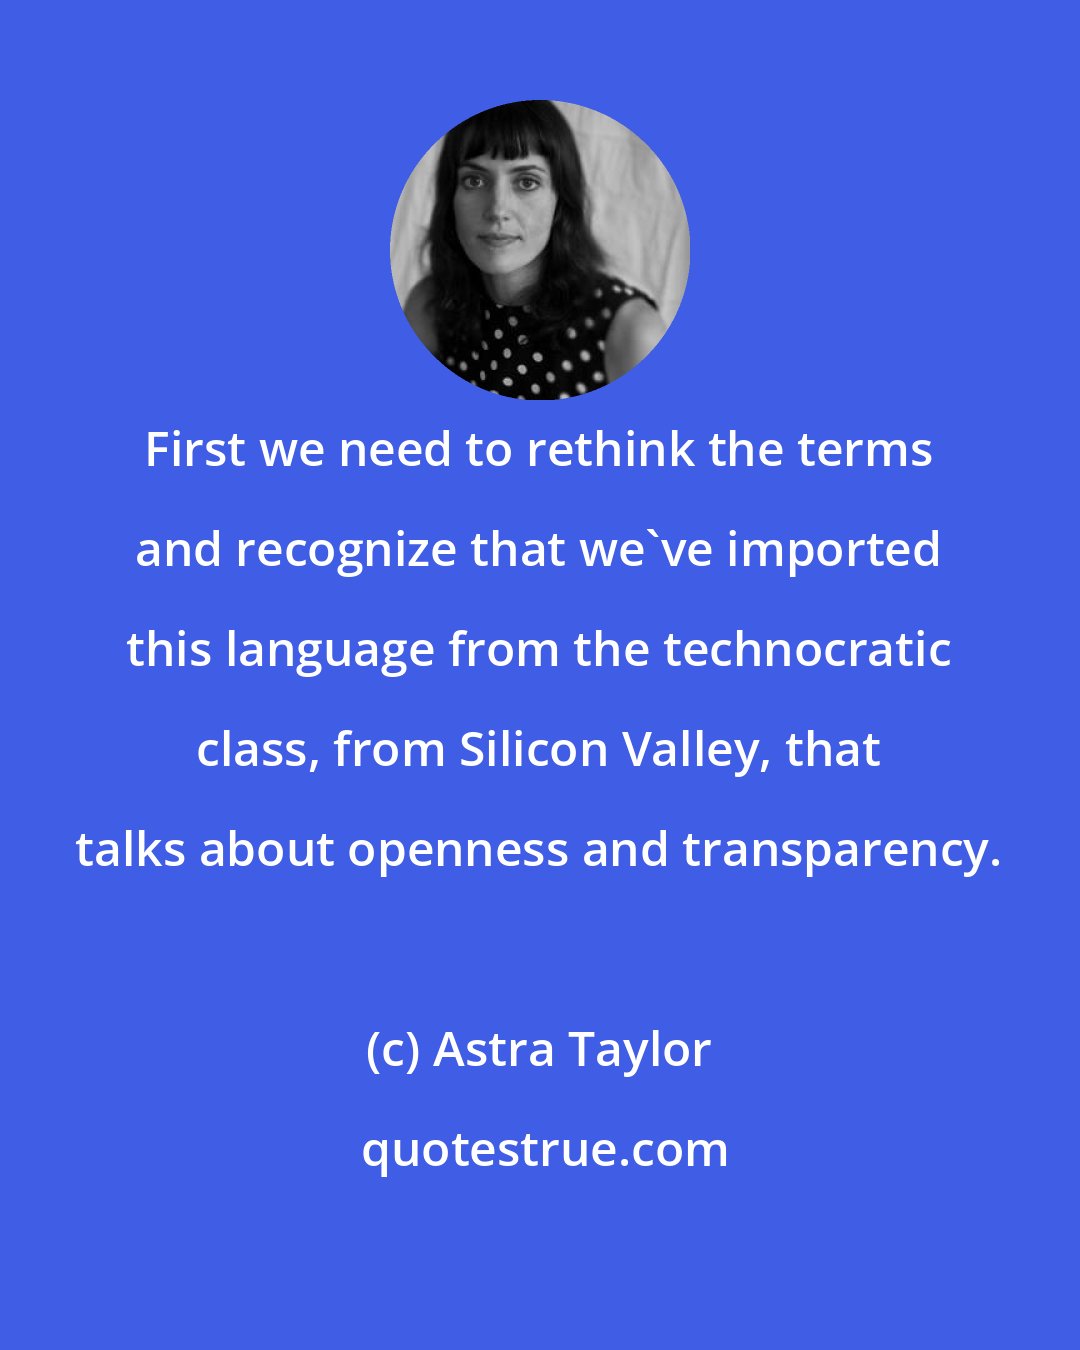 Astra Taylor: First we need to rethink the terms and recognize that we've imported this language from the technocratic class, from Silicon Valley, that talks about openness and transparency.